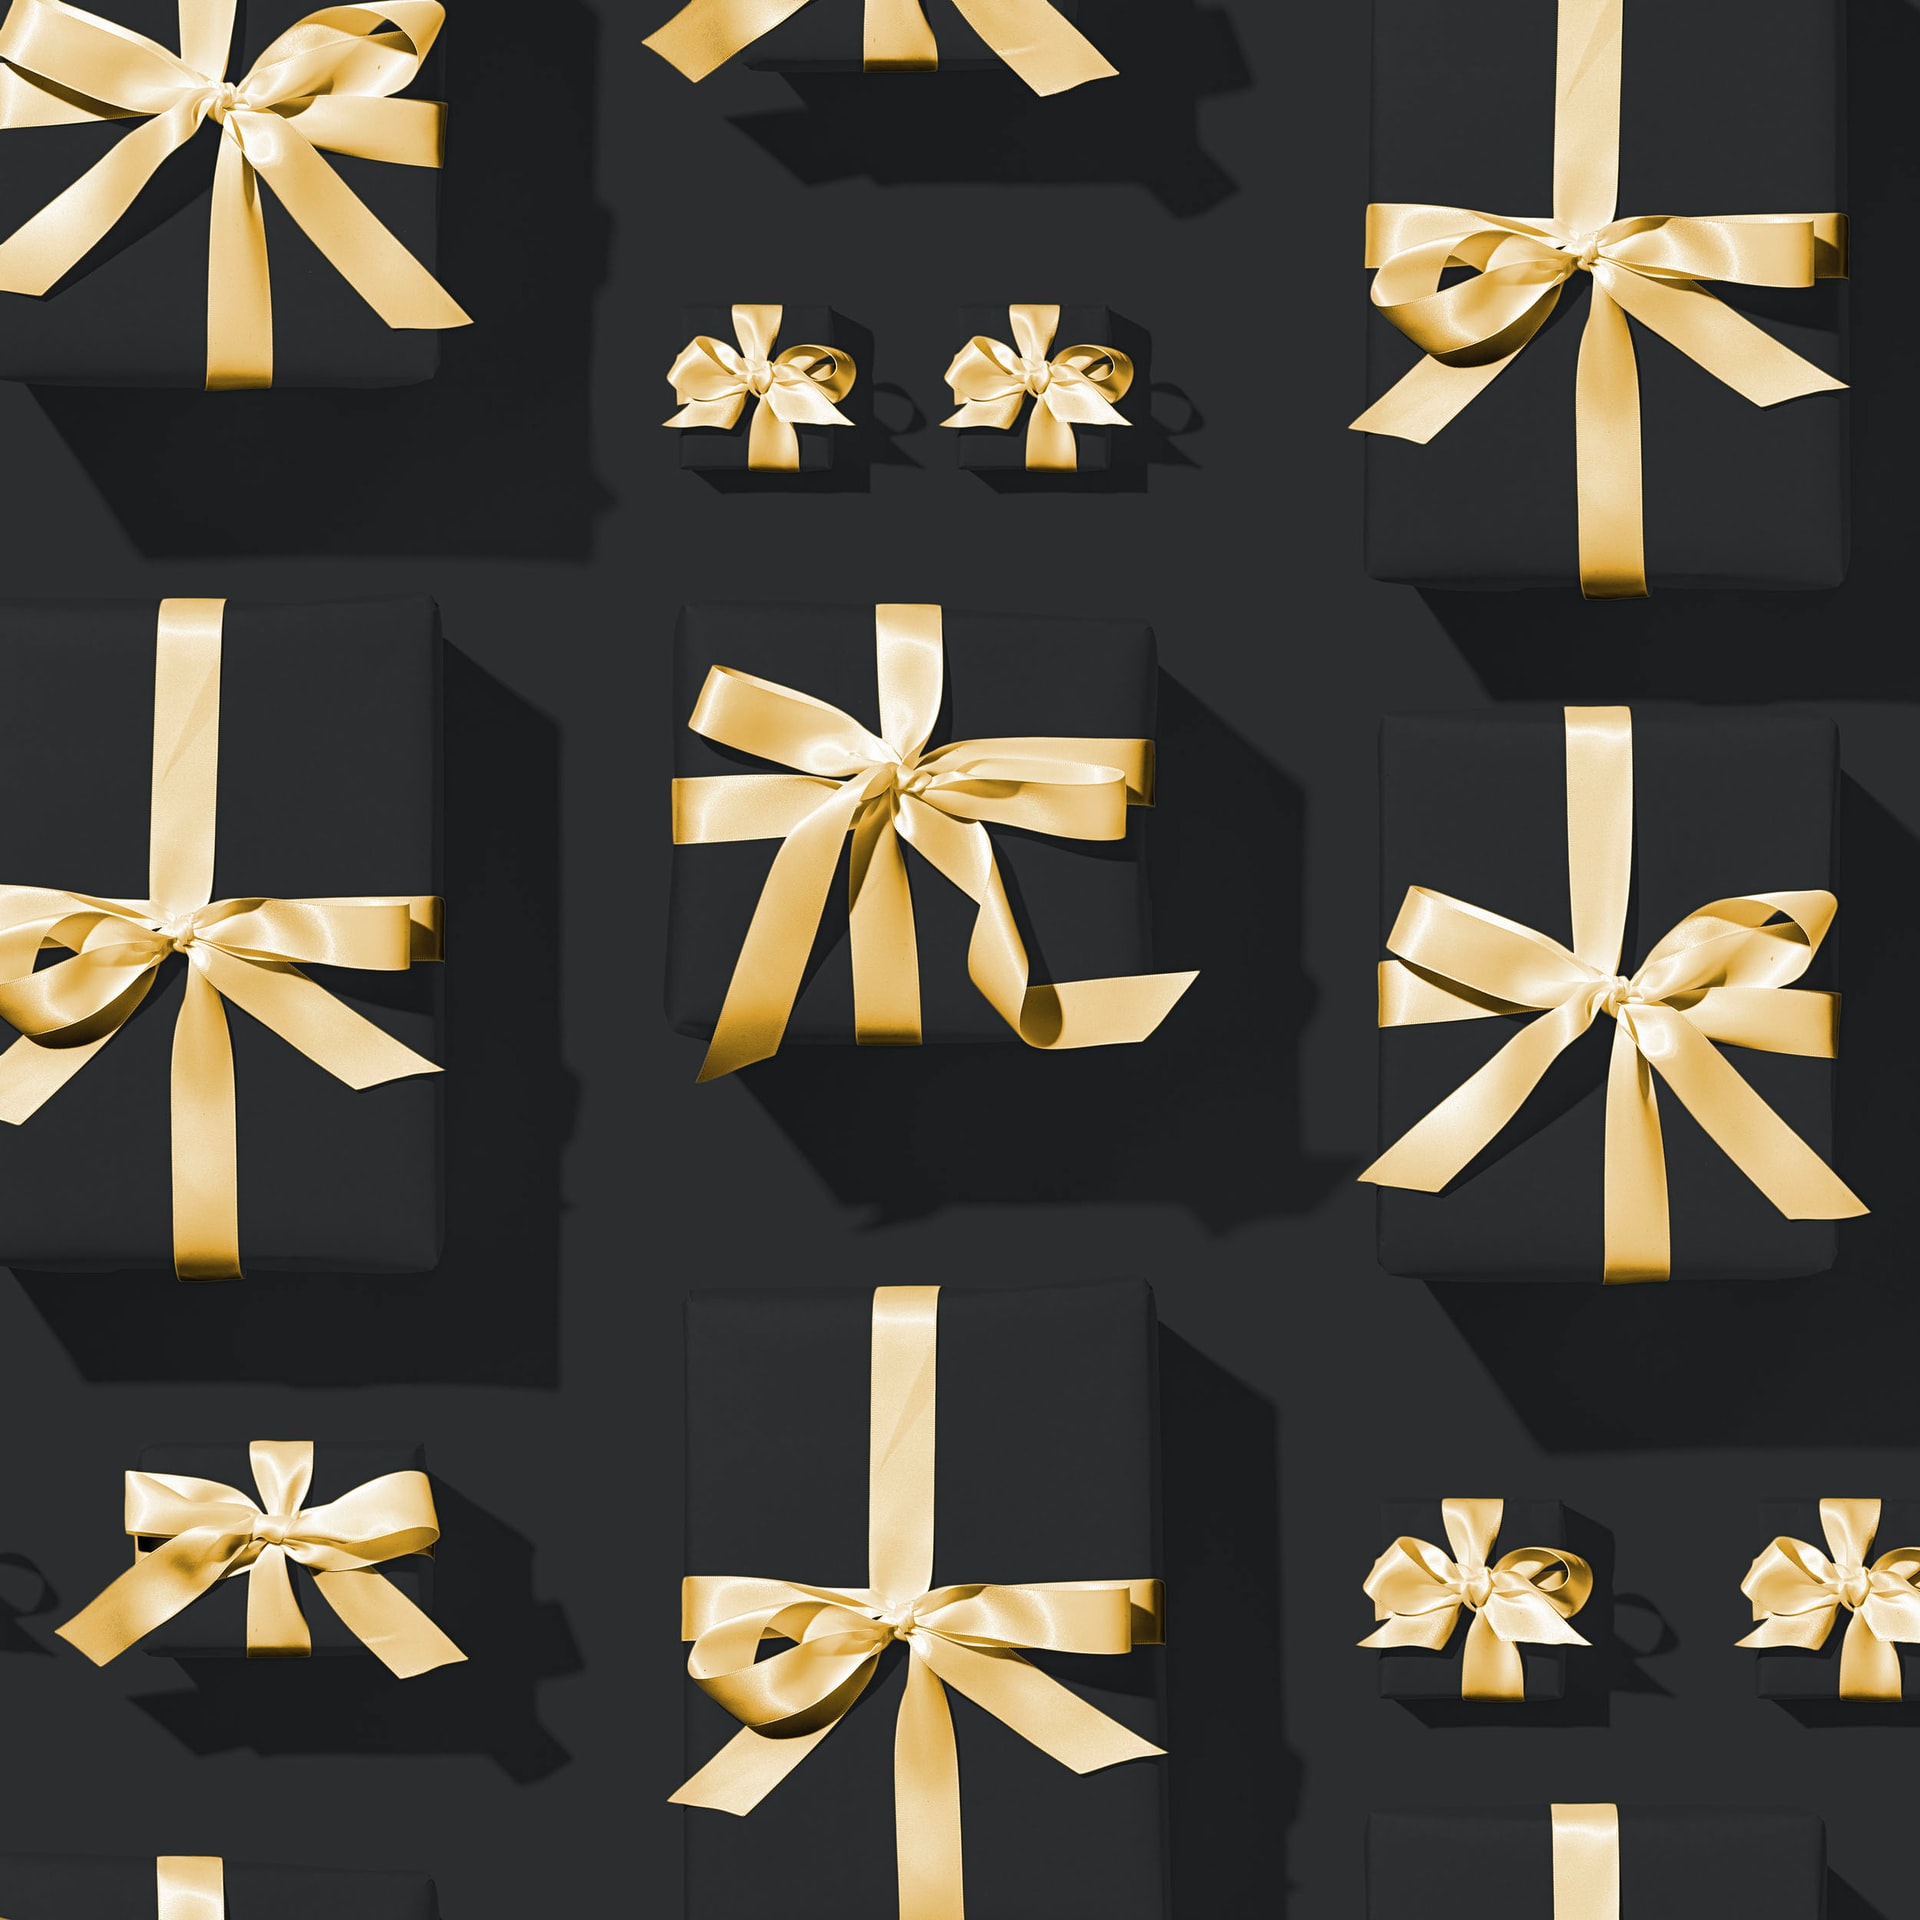 Gift Giving, Gift Returning – The Unexpected Emotions Behind Receiving an Unwanted Gift